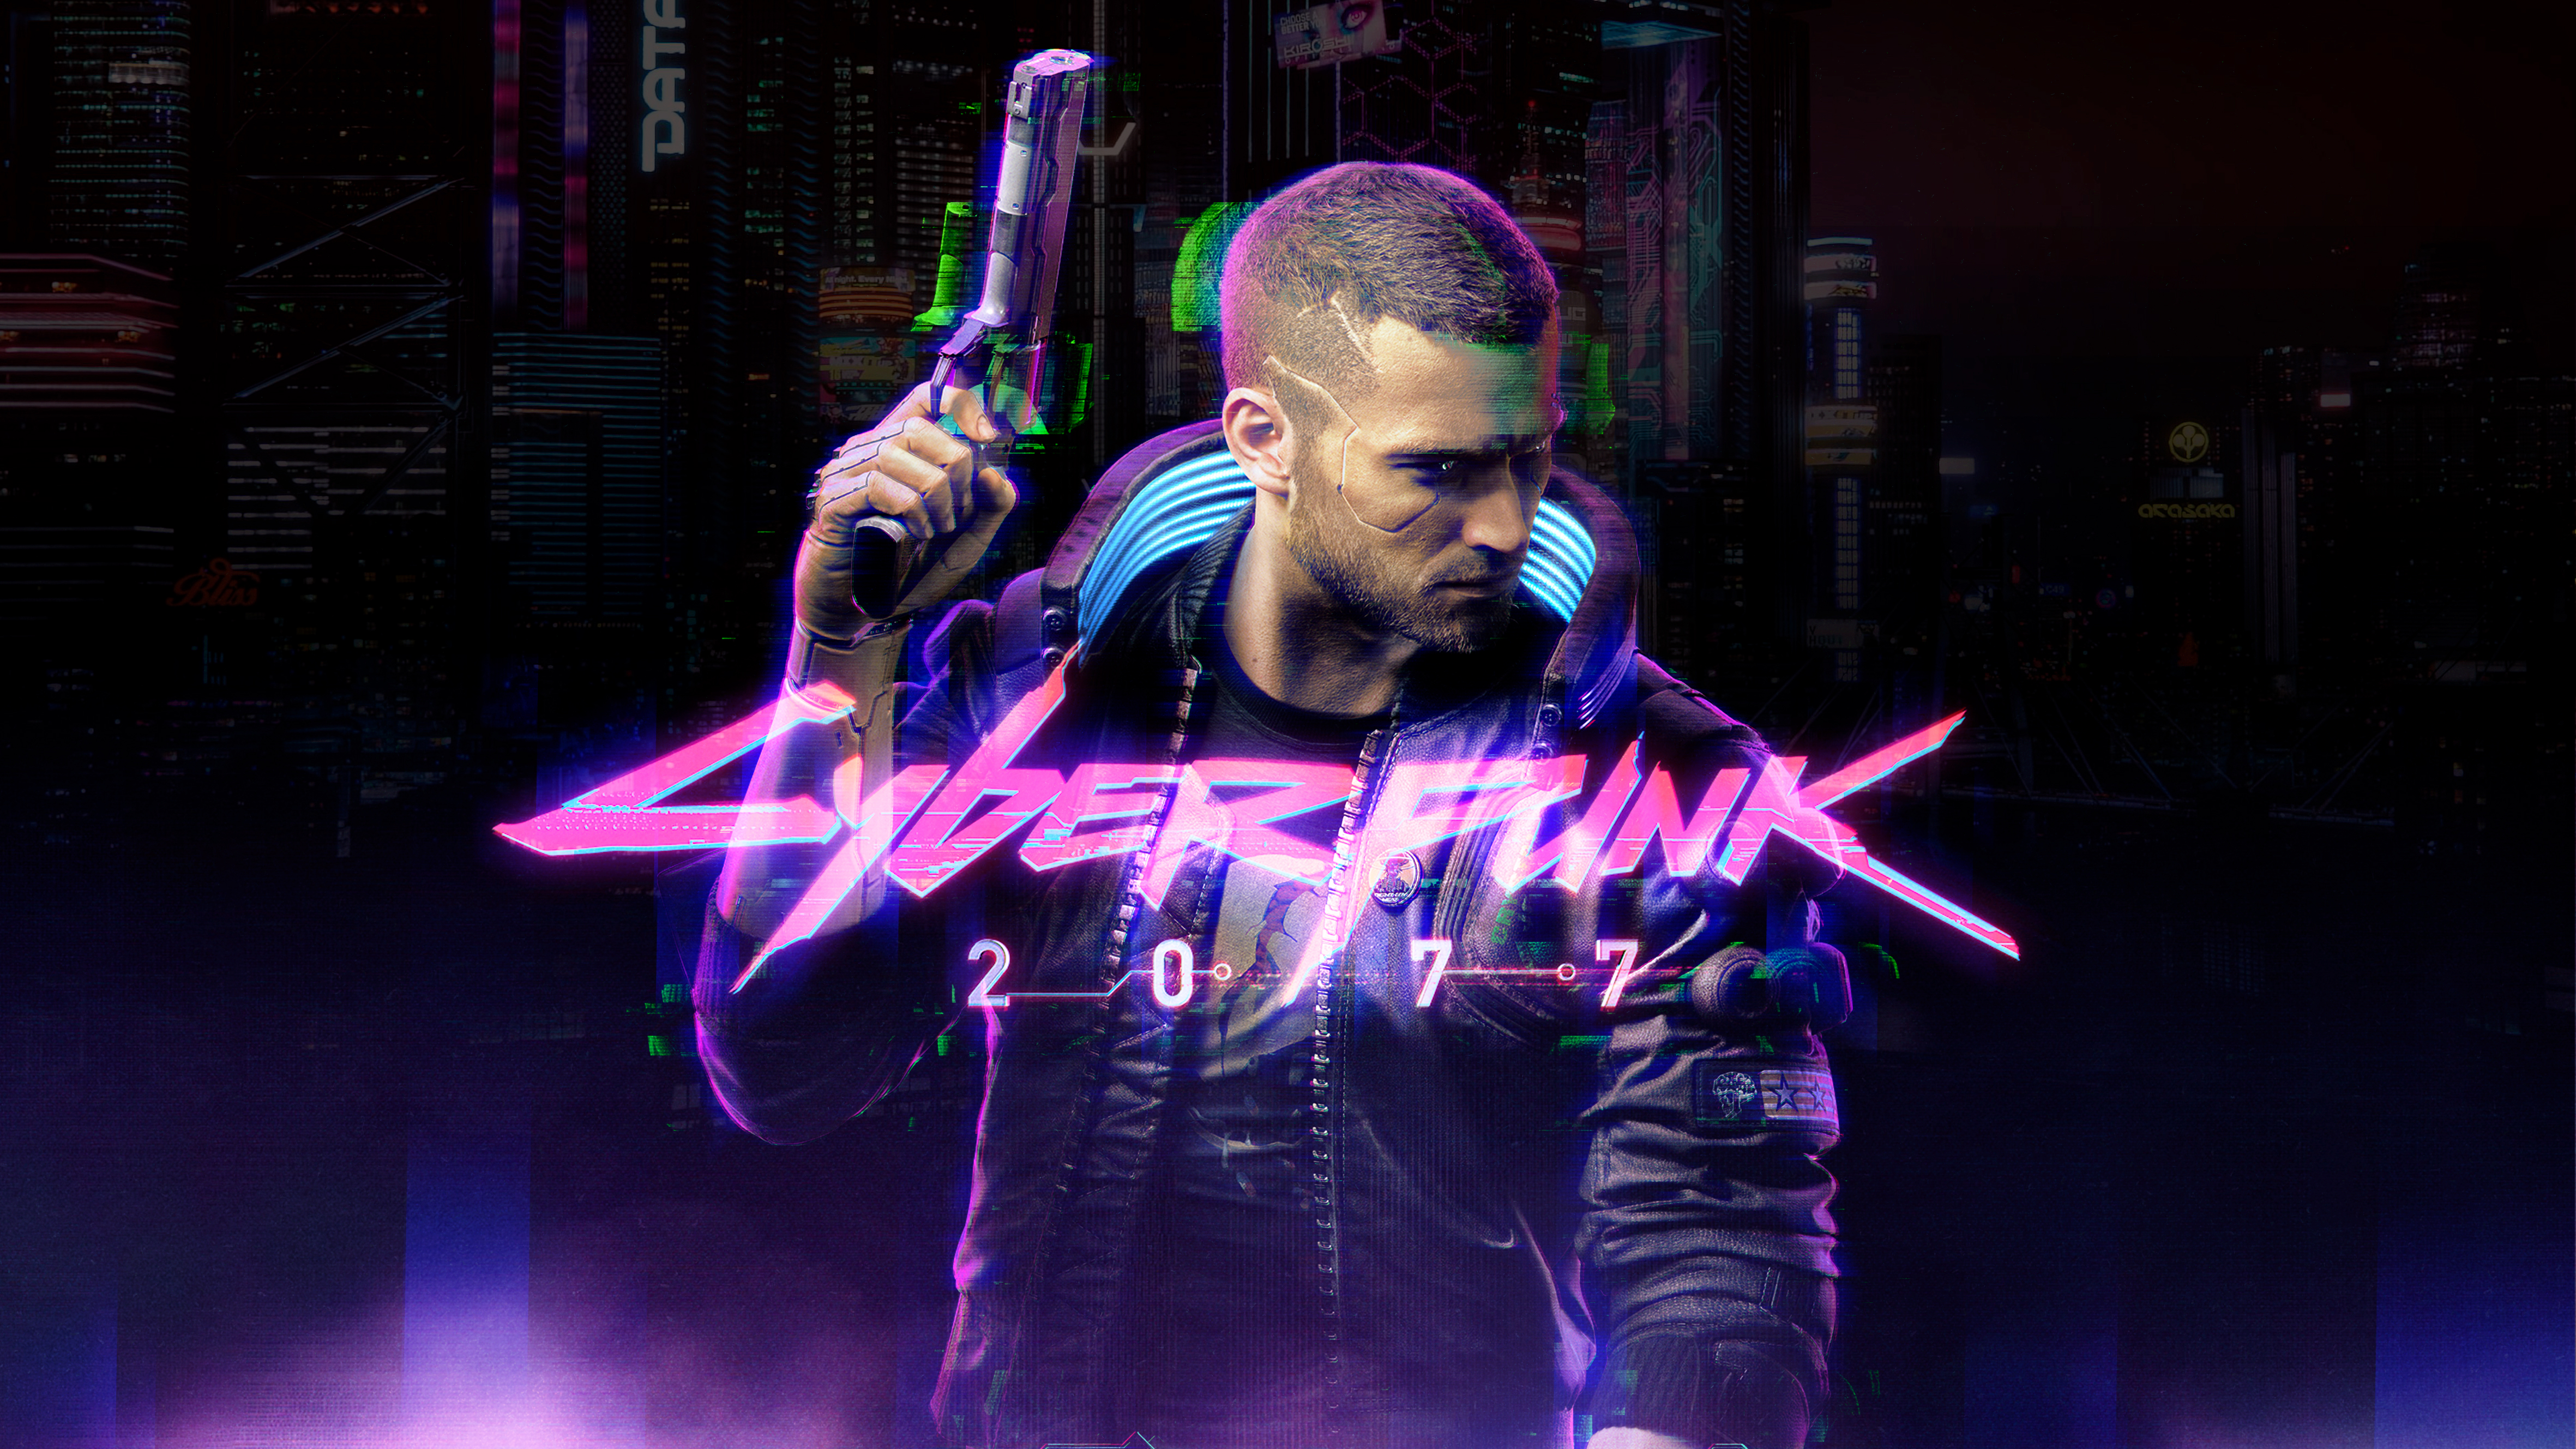 4k Cyberpunk 2077 Game, HD Games, 4k Wallpapers, Images, Backgrounds